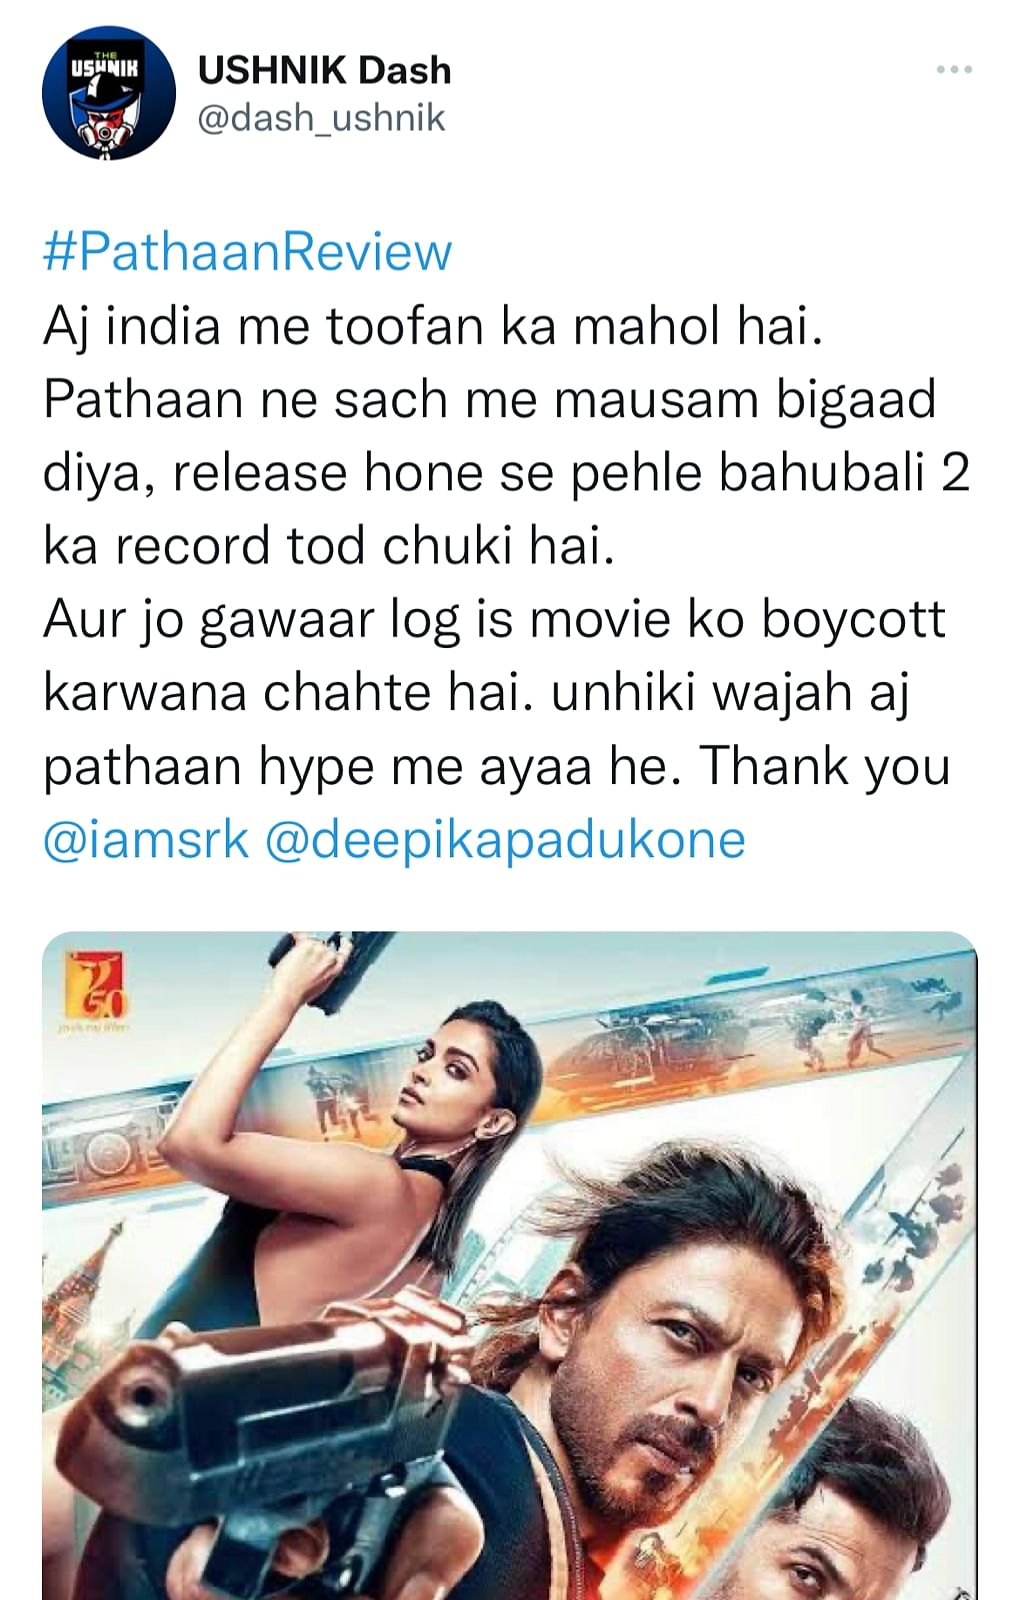 Fans make #PathaanFirstDayFirstShow trend on Twitter as Shah Rukh Khan and Deepika Padukone's 'Pathaan' releases.